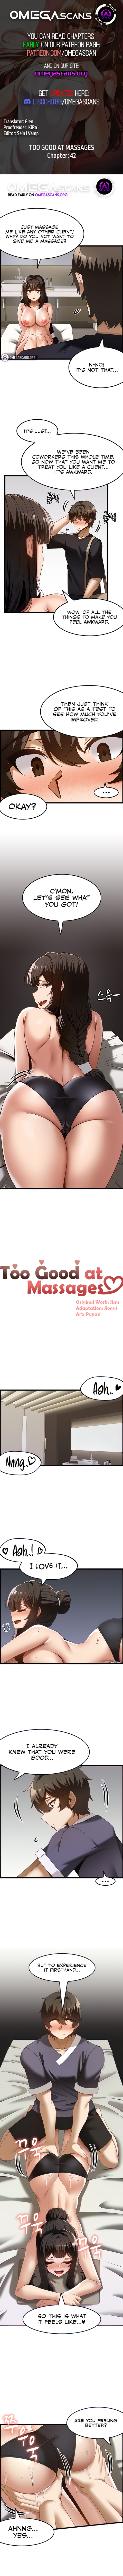 Too Good At Massages NEW image